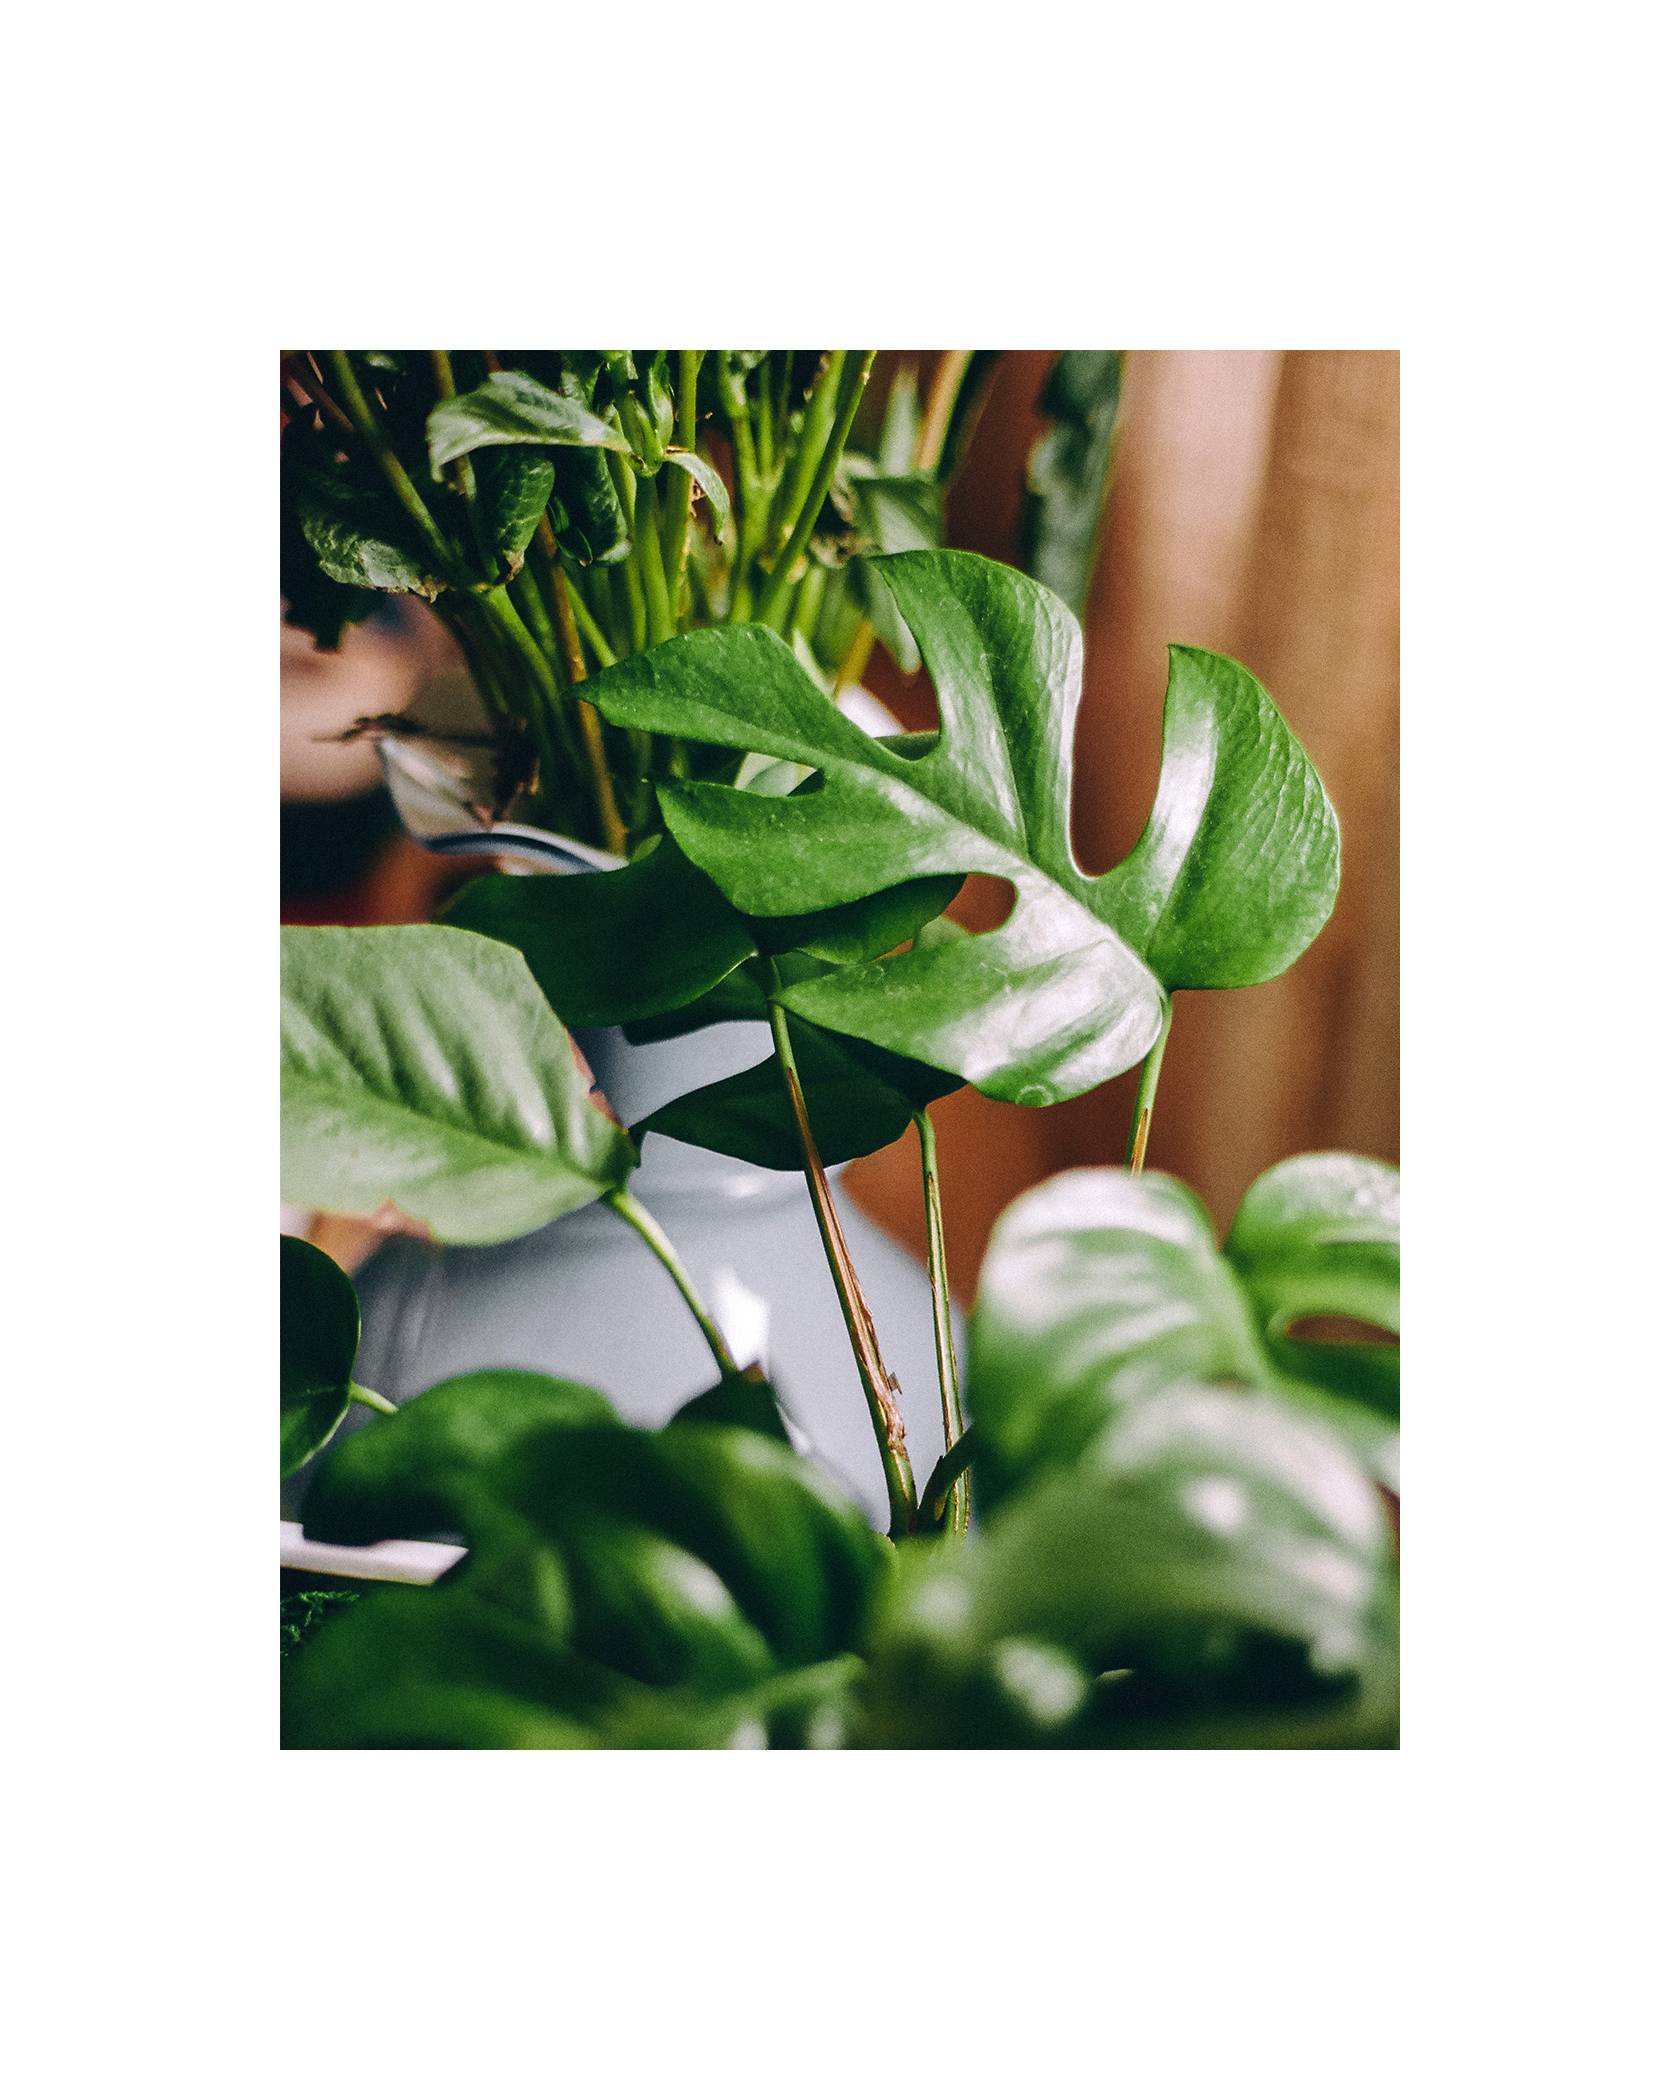 Image of house plants with a focus on a green monstera leaf.